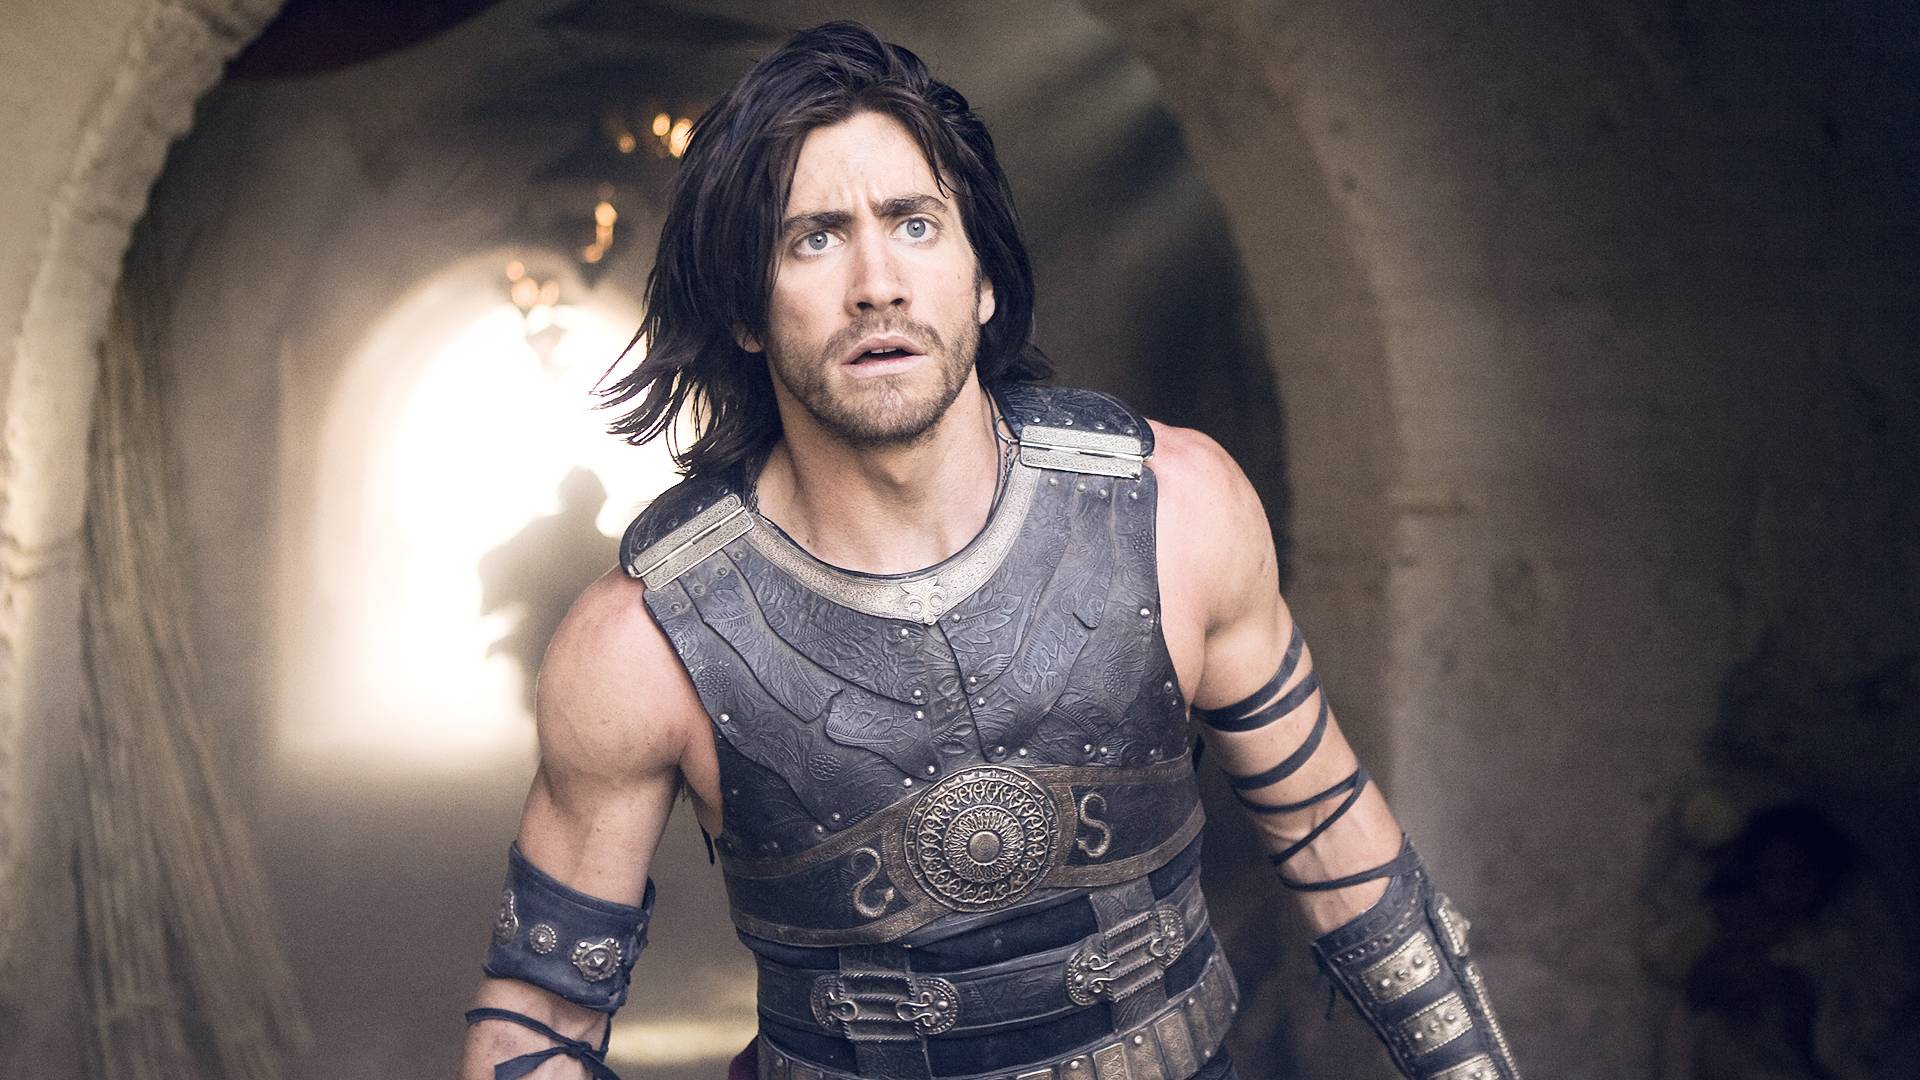 Prince of persia film hi-res stock photography and images - Alamy